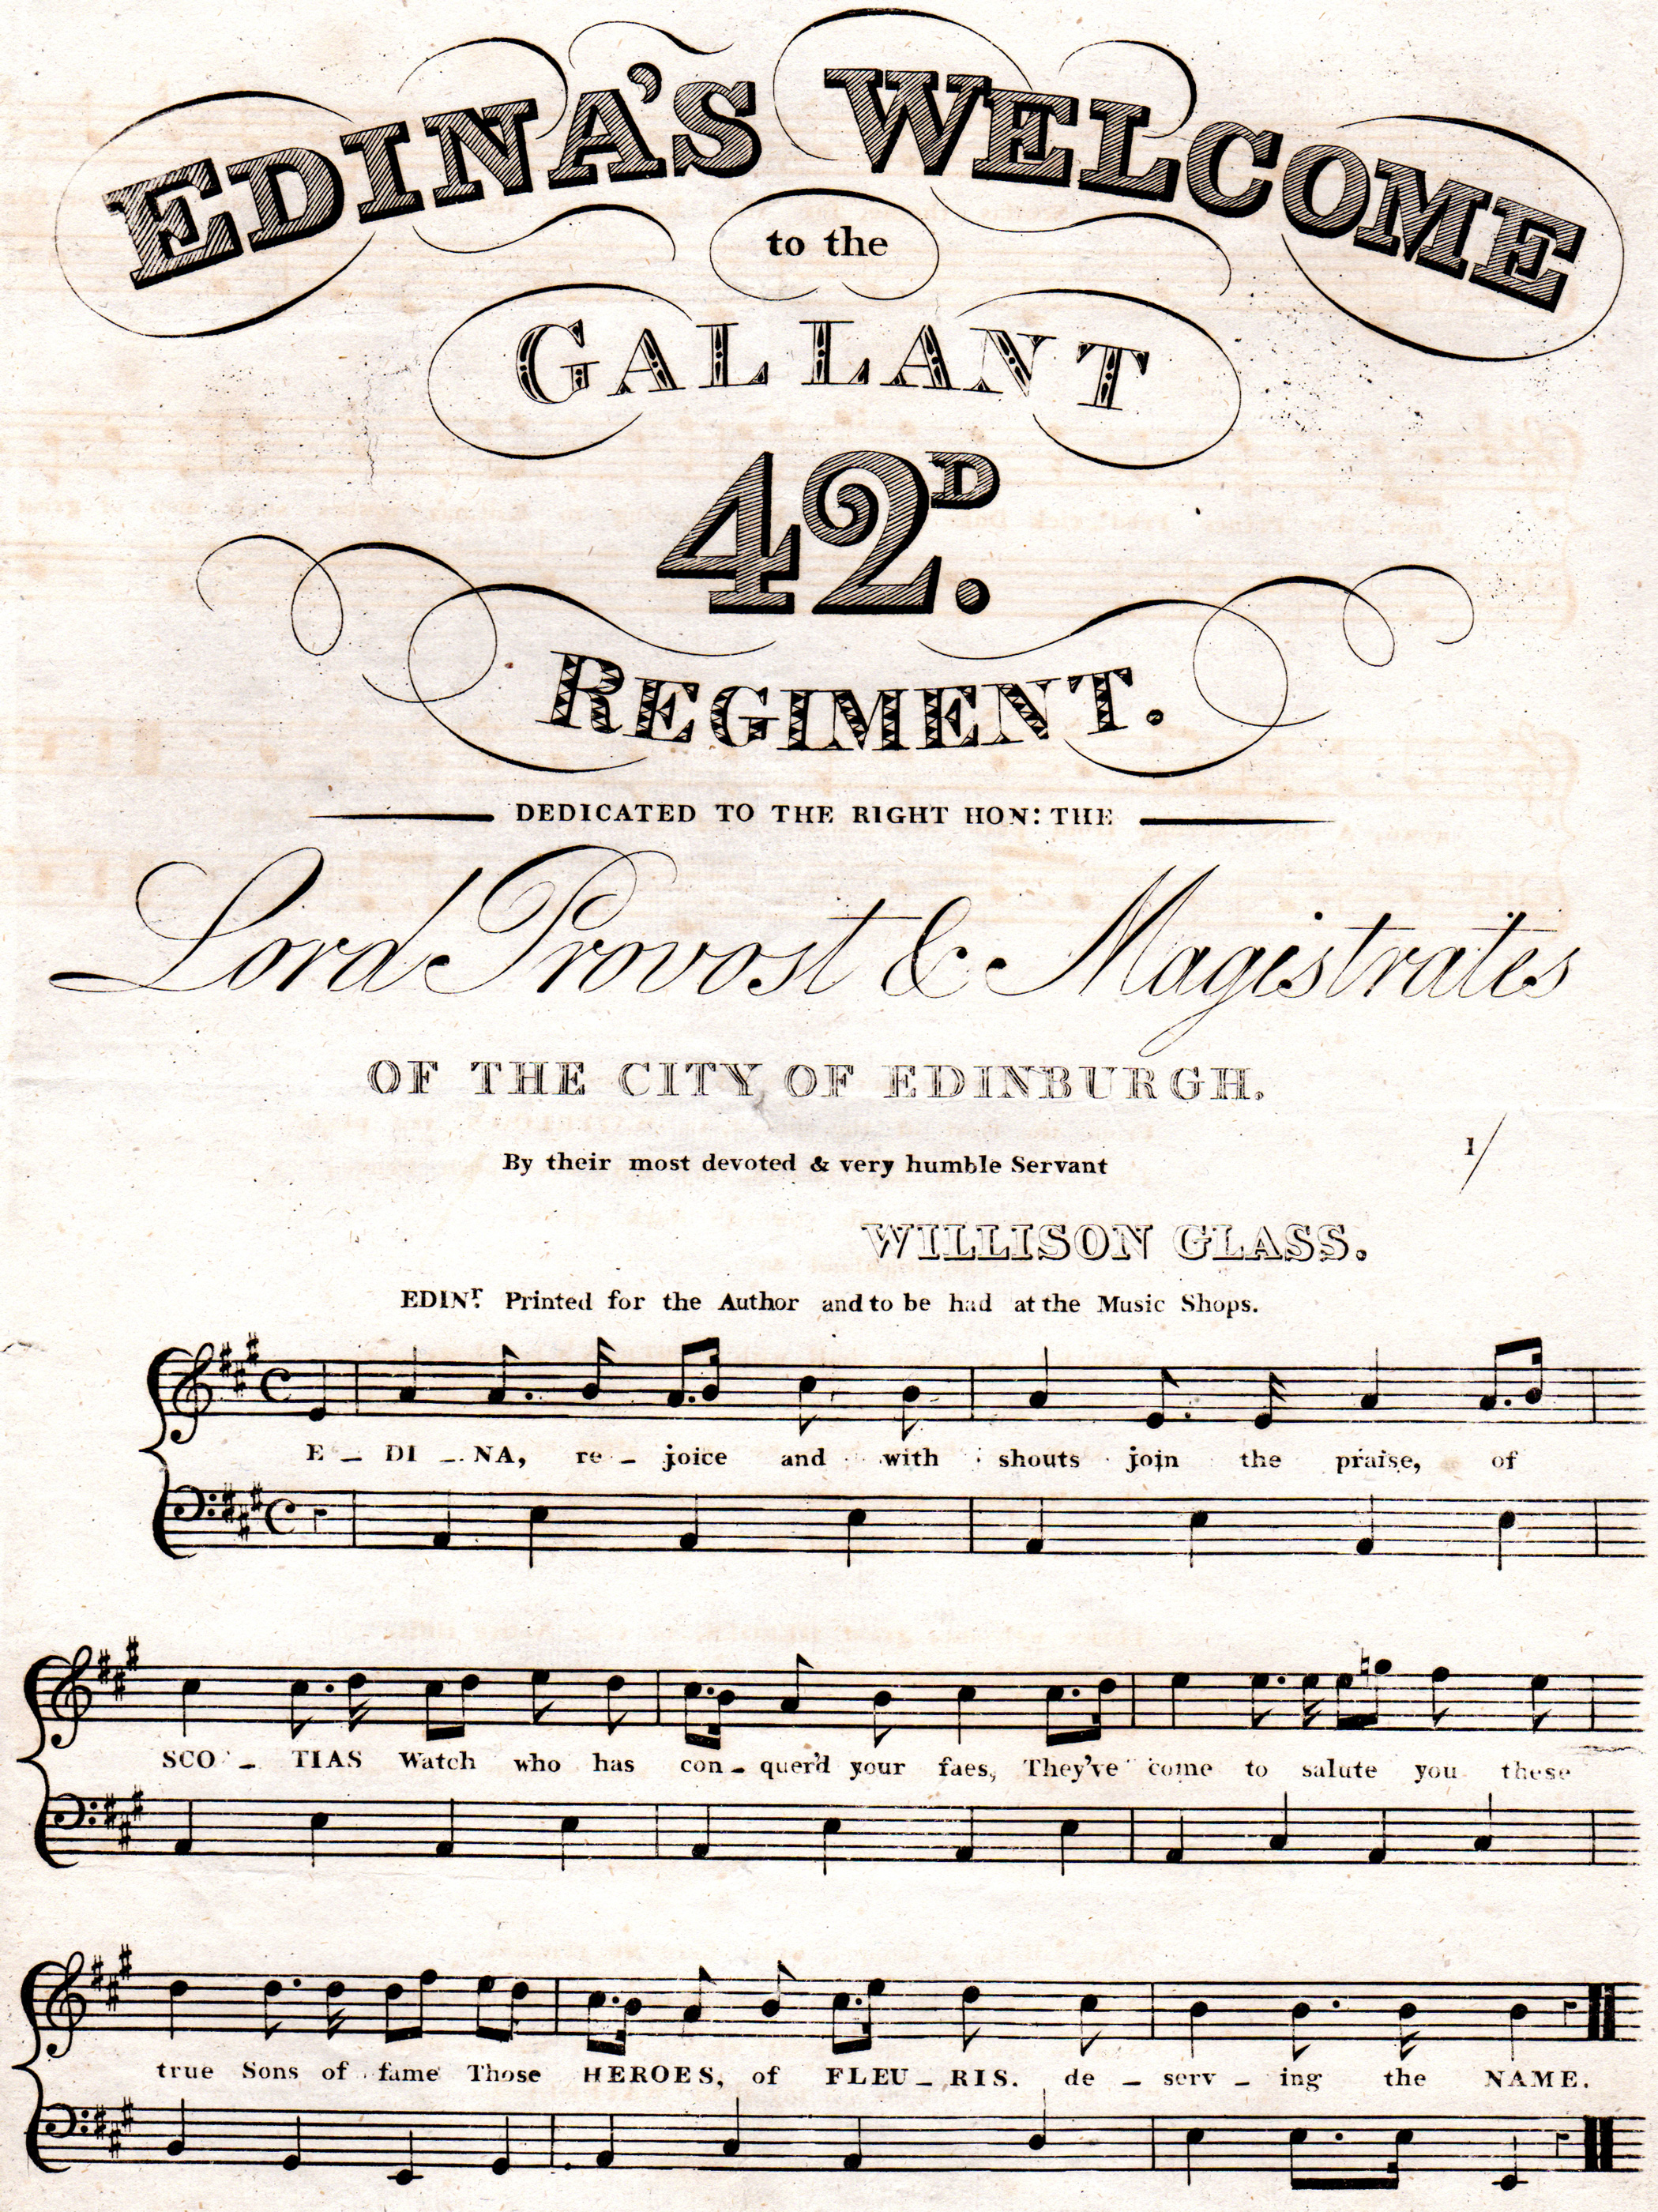 Early 19th-century engraved sheet music